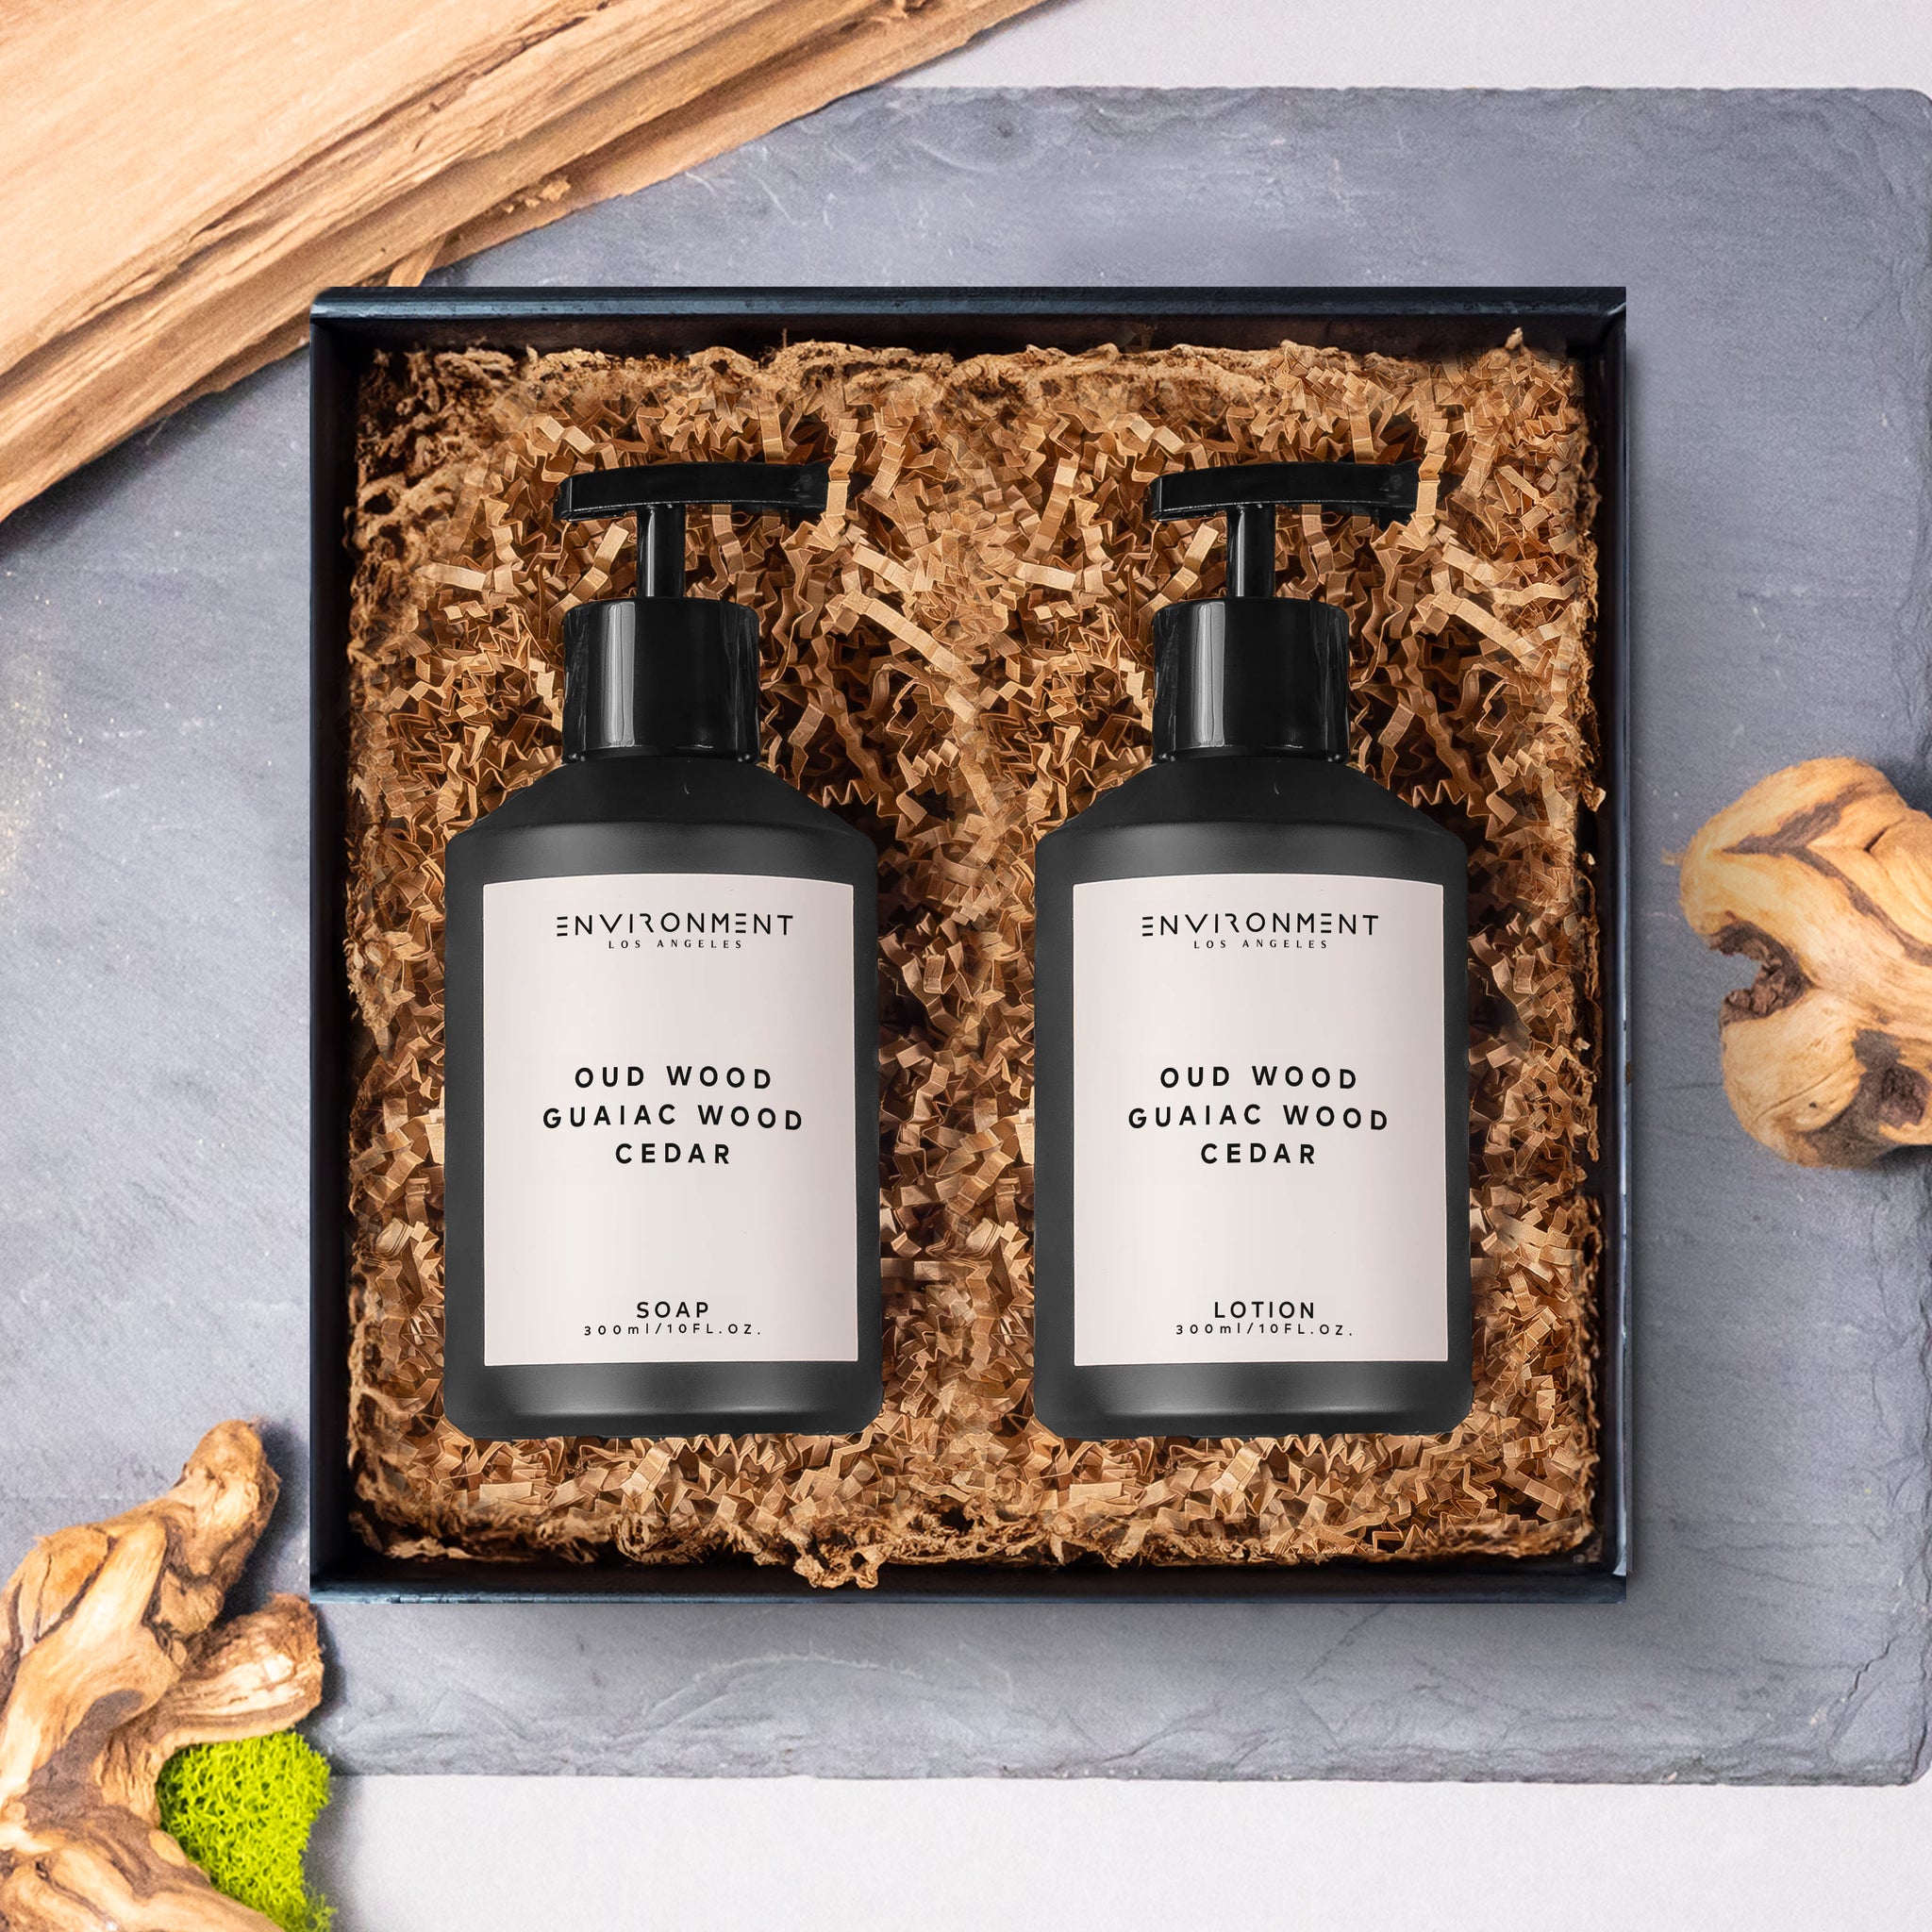 Oud Wood | Guaiac Wood | Cedar 300ml Hand Soap and 300ml Lotion Gift Pack (Inspired by Tom Ford Oud Wood®)